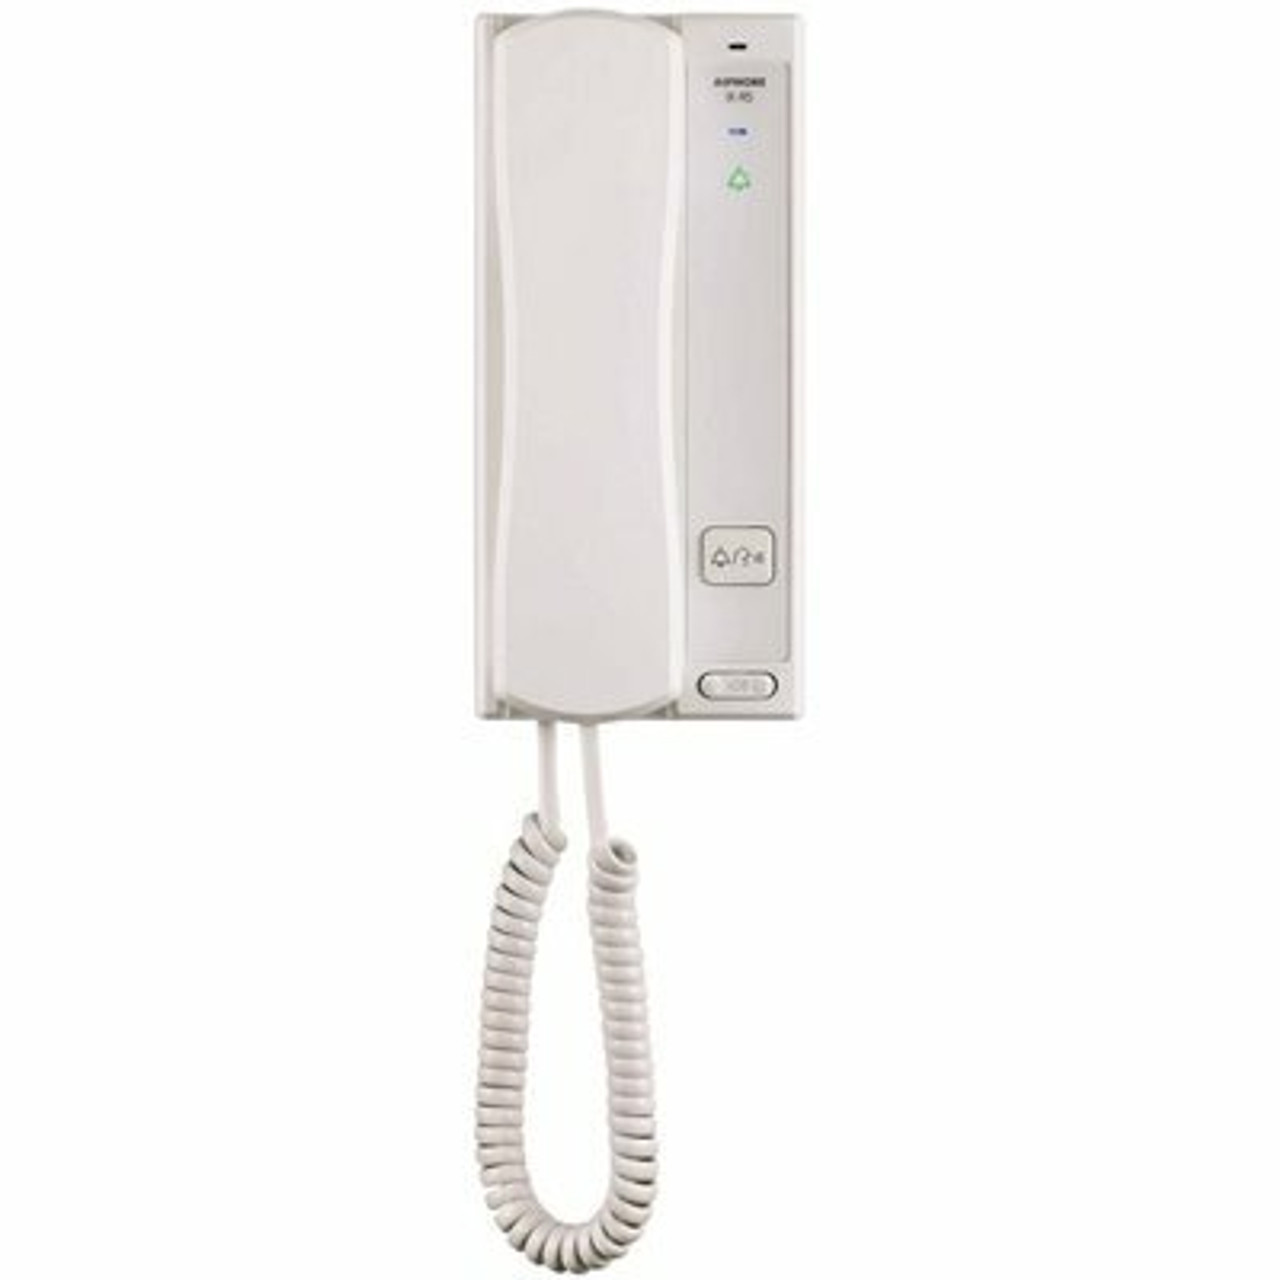 Aiphone Ix Series Wall Mount 1-Channel Ip Audio Sub Station Intercom With Handset, White